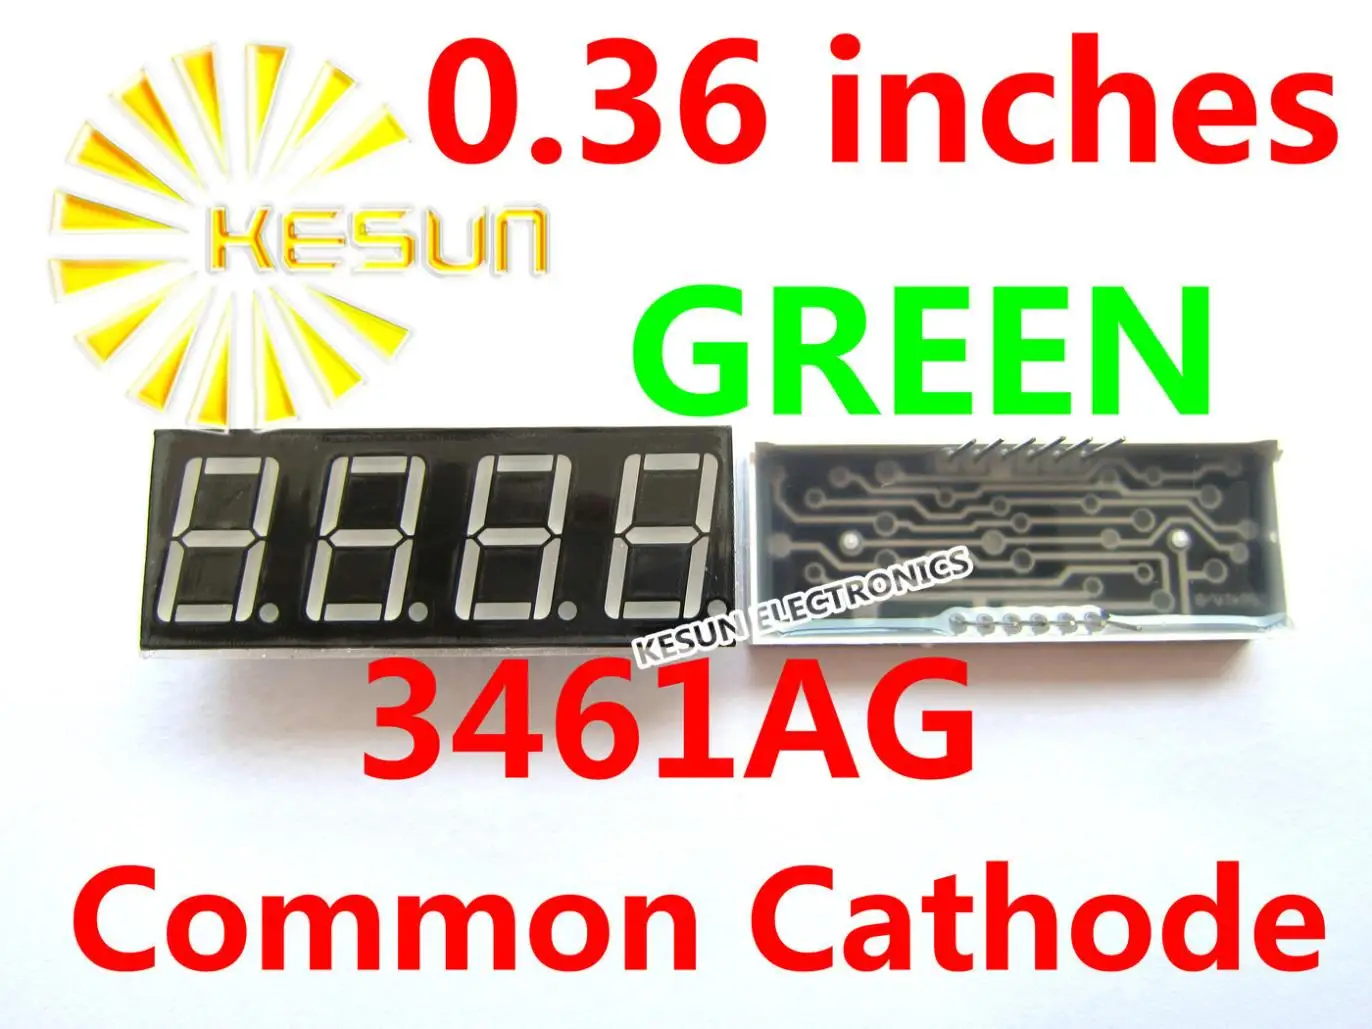 

5PCS x 0.36 inches Green Red Common Cathode/Anode 4 Digital Tube 3461AG 3461BG 3461AS 3461BS LED Display Module Light Beads